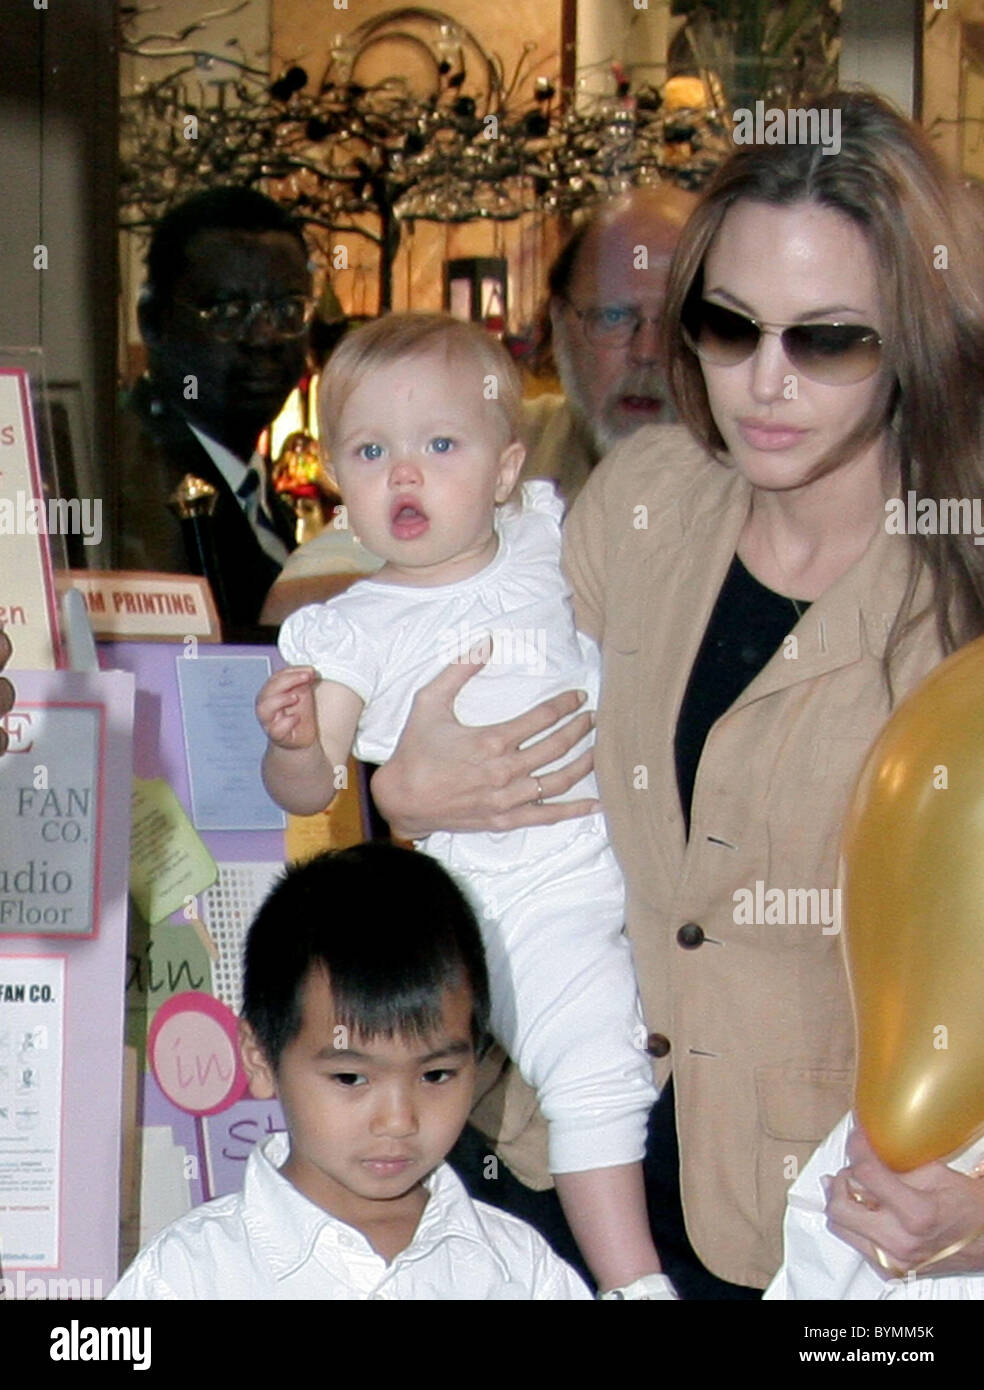 Shiloh Jolie-Pitt Angelina Jolie and family shopping for a Father's Day present at 'Lee's Art store' New York City, USA- Stock Photo